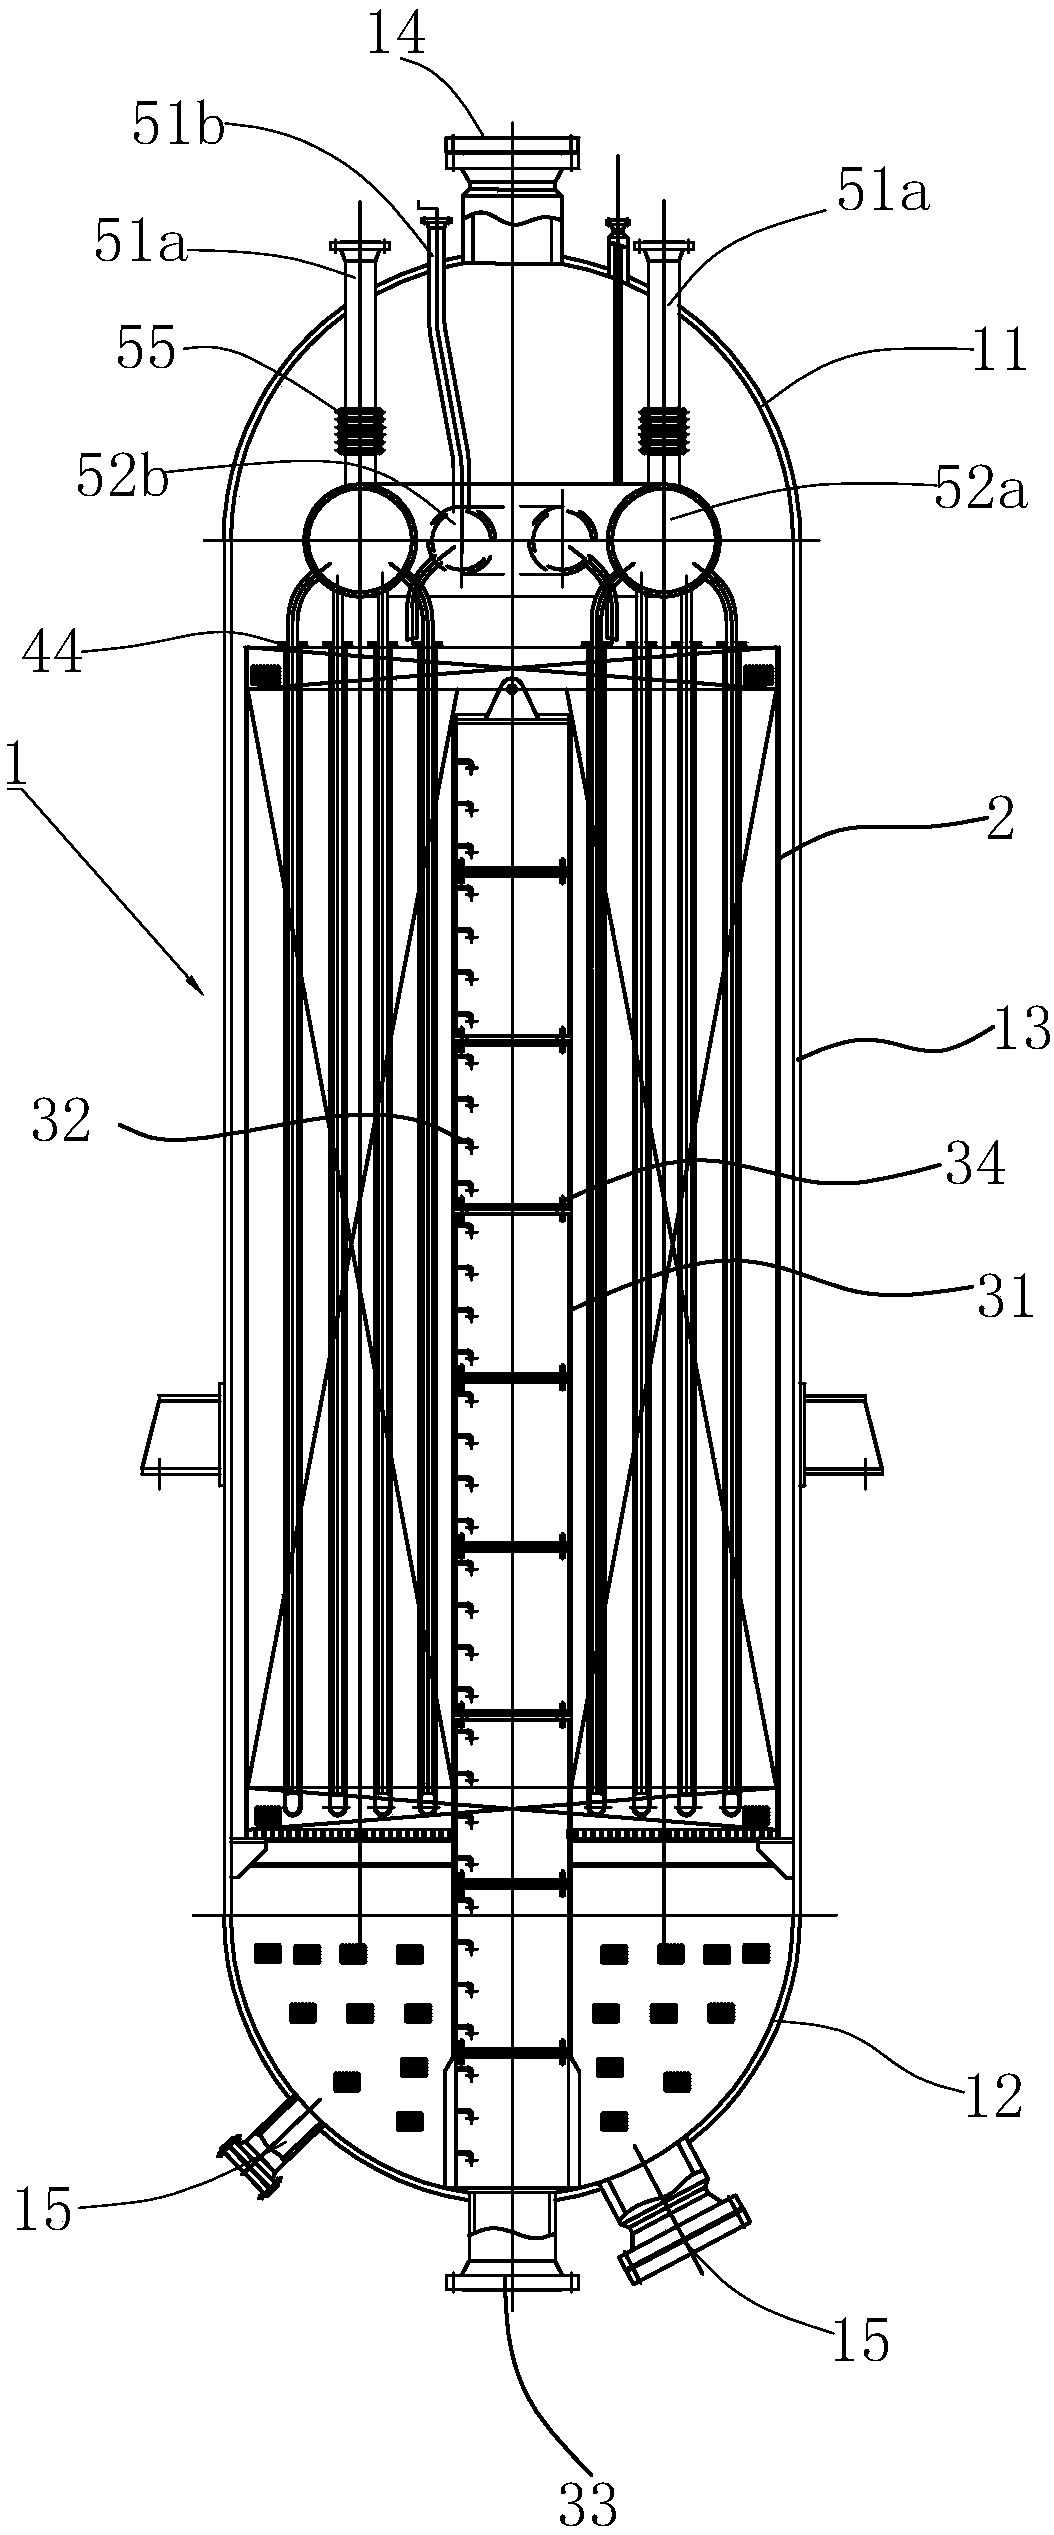 Temperature-variable isothermal shift reactor